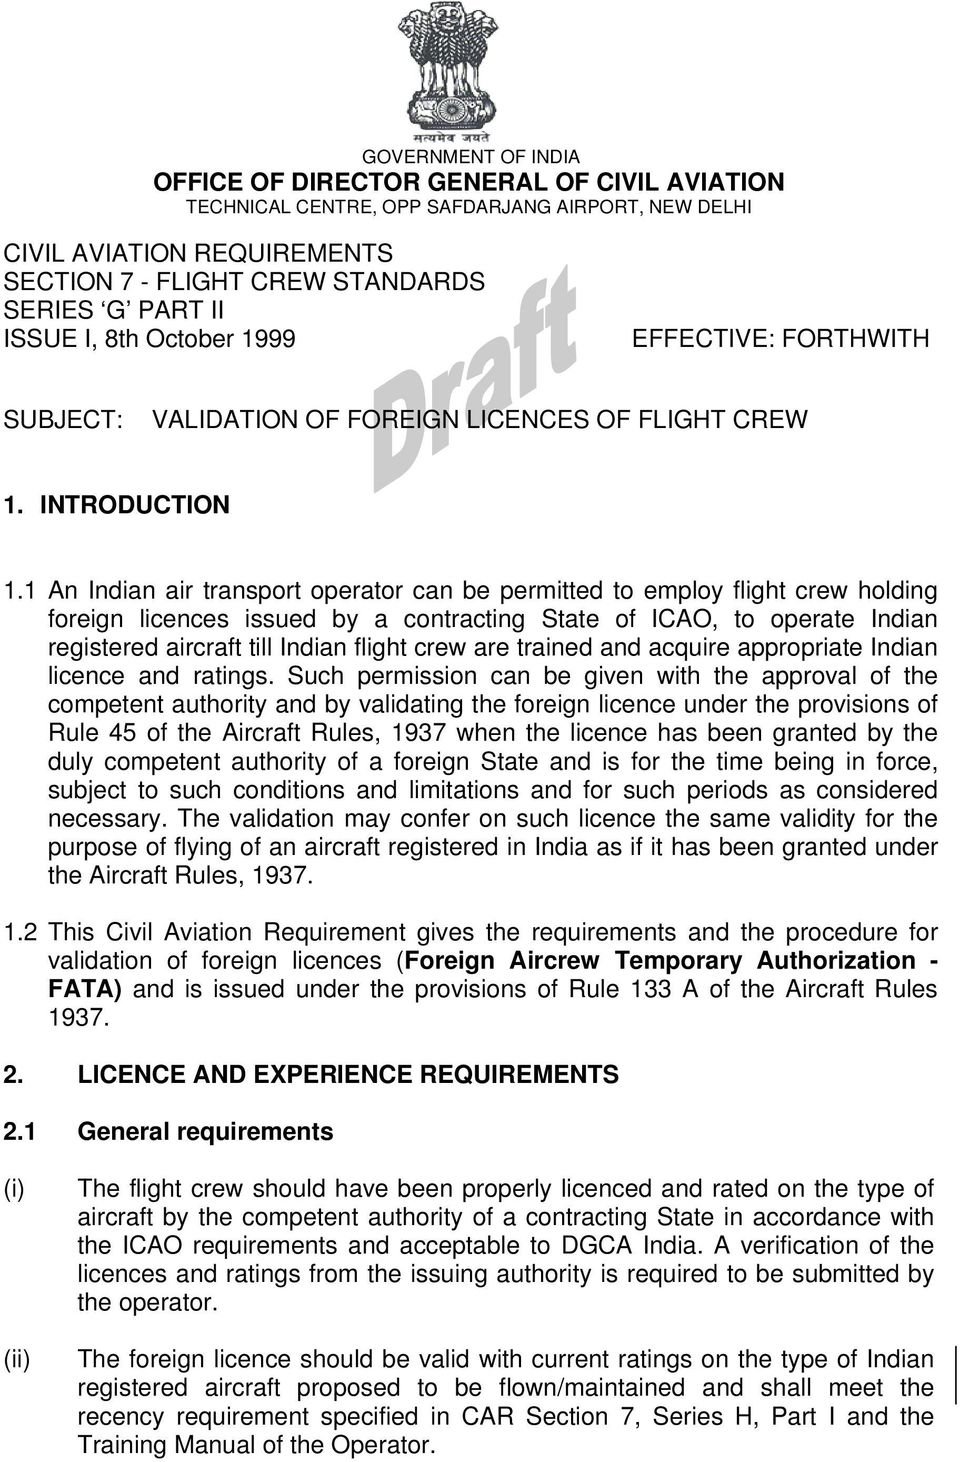 1 An Indian air transport operator can be permitted to employ flight crew holding foreign licences issued by a contracting State of ICAO, to operate Indian registered aircraft till Indian flight crew